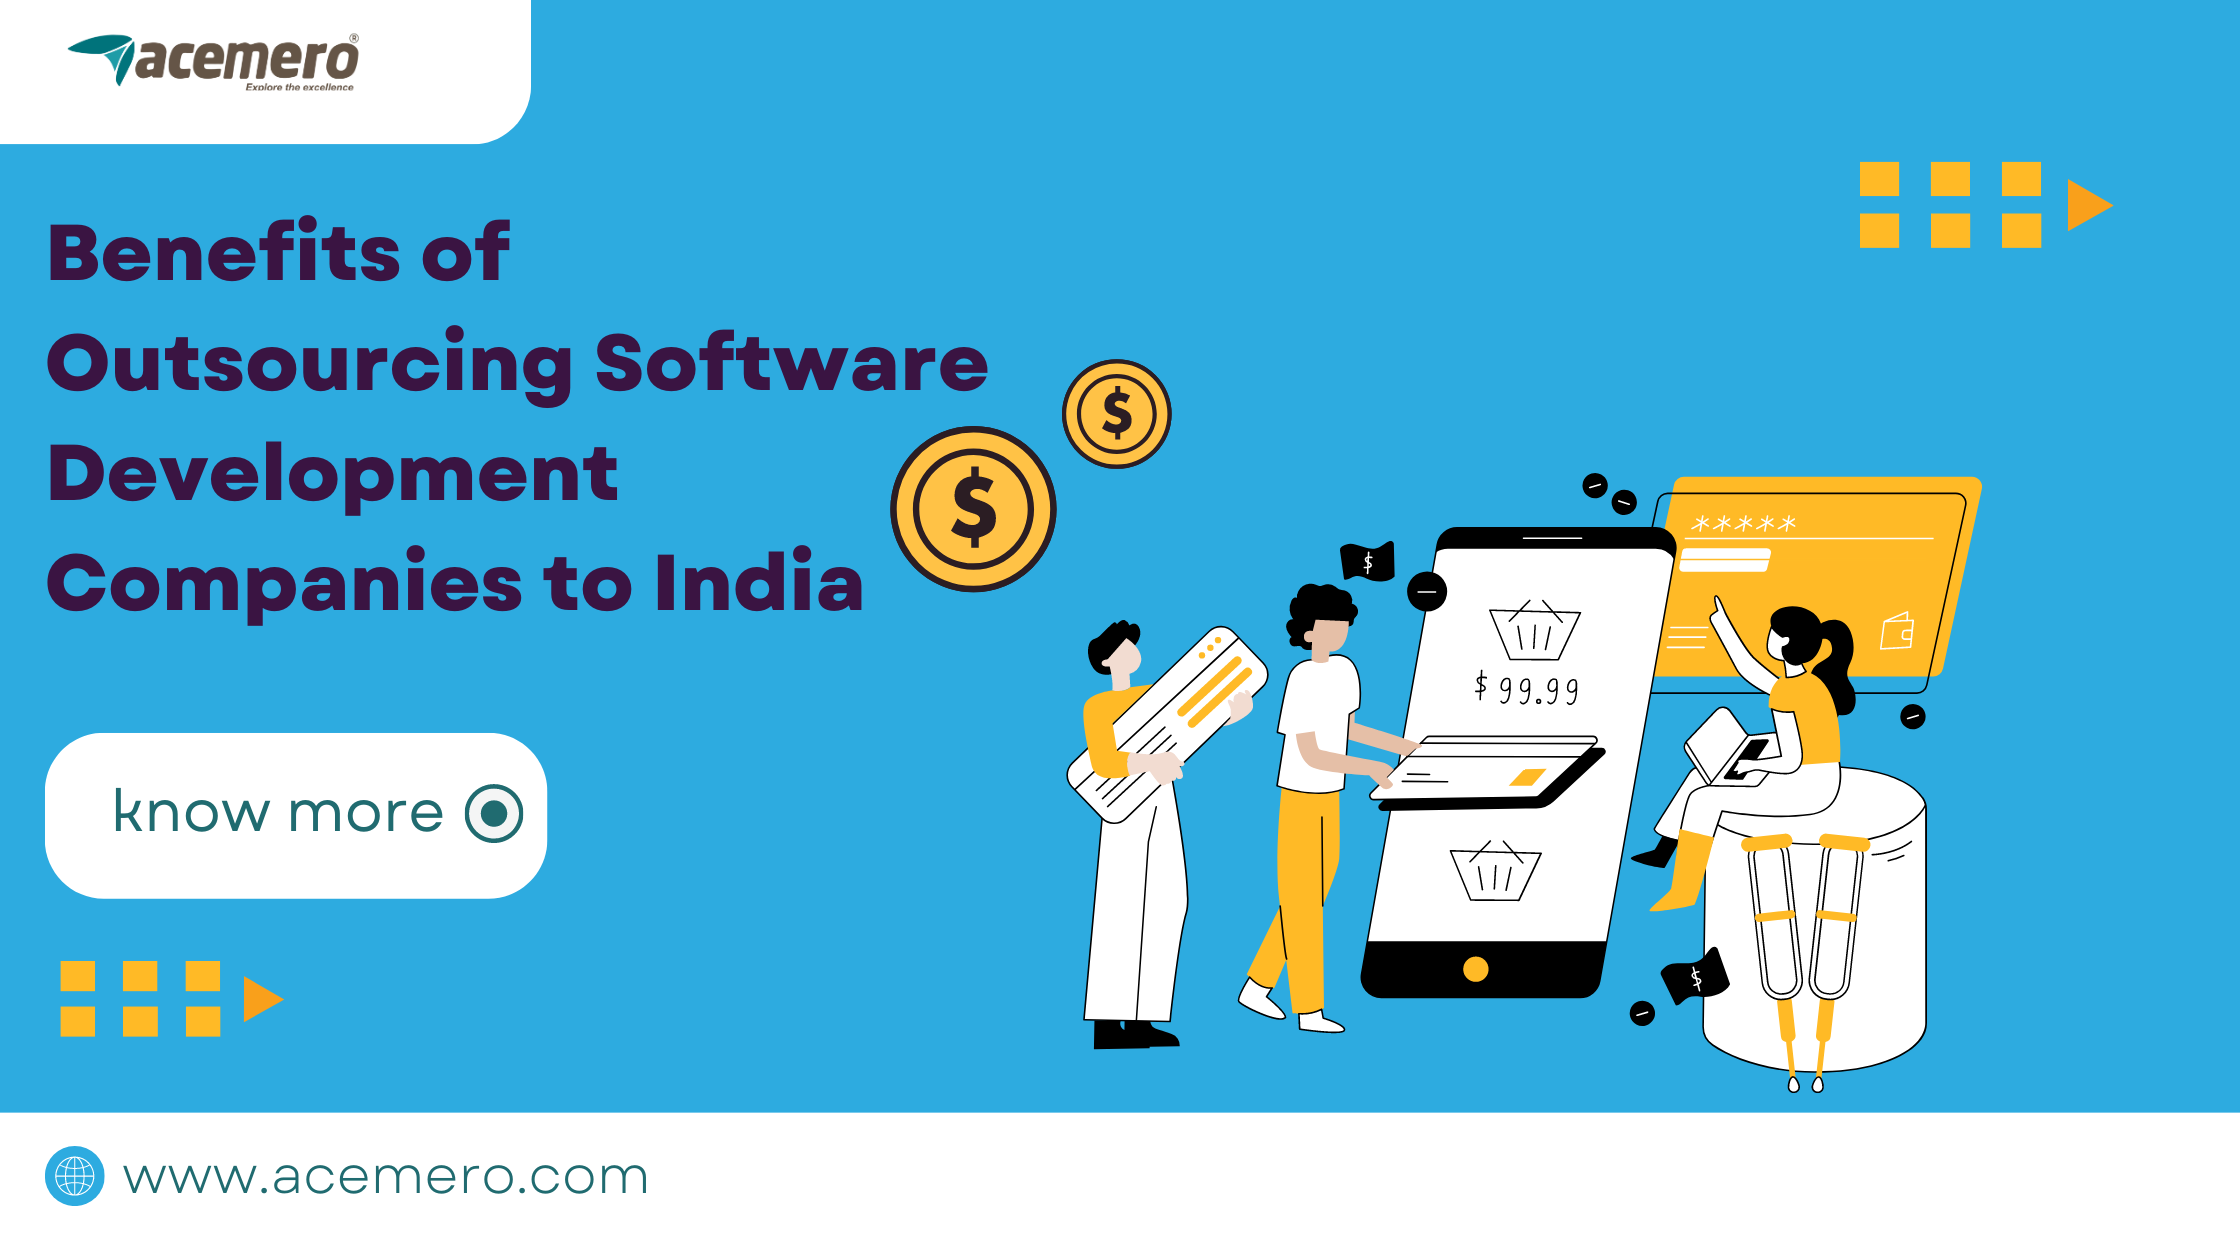 Benefits of Outsourcing Software Development Companies to India